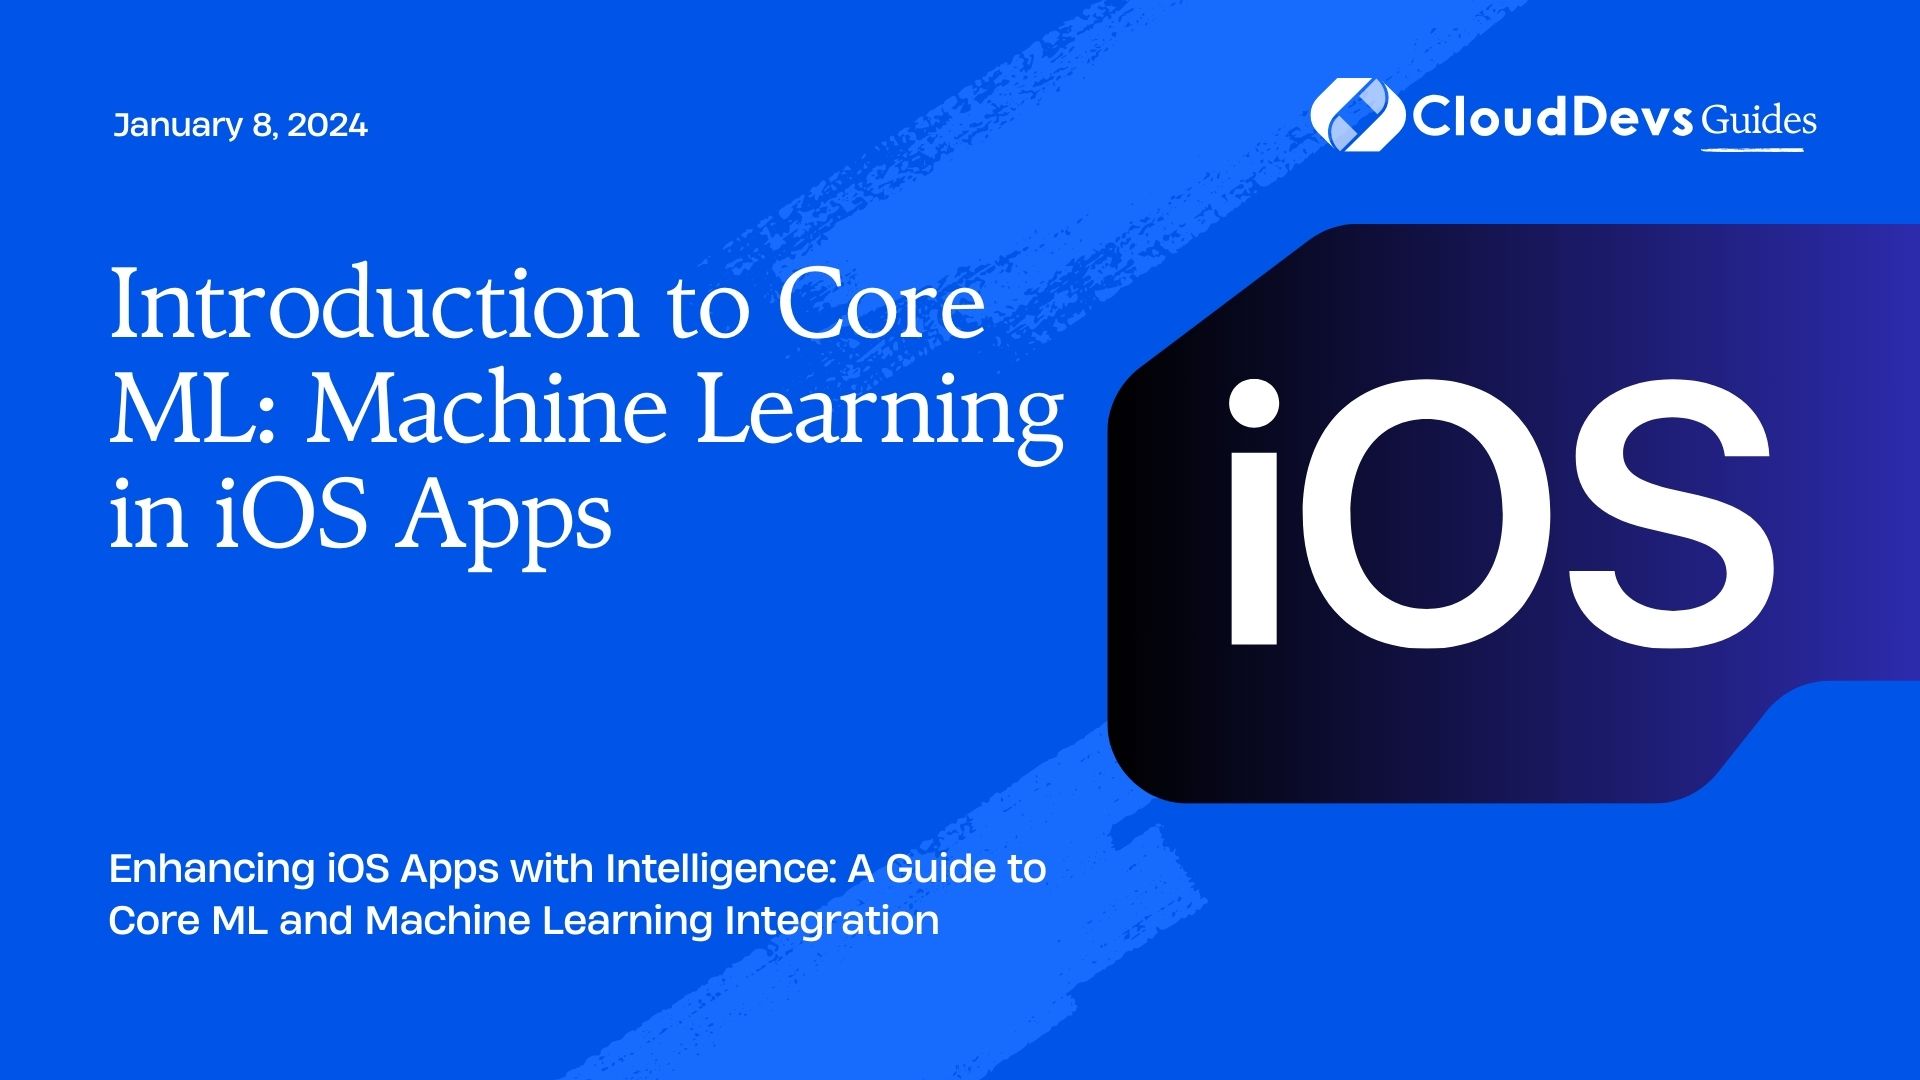 Introduction to Core ML: Machine Learning in iOS Apps